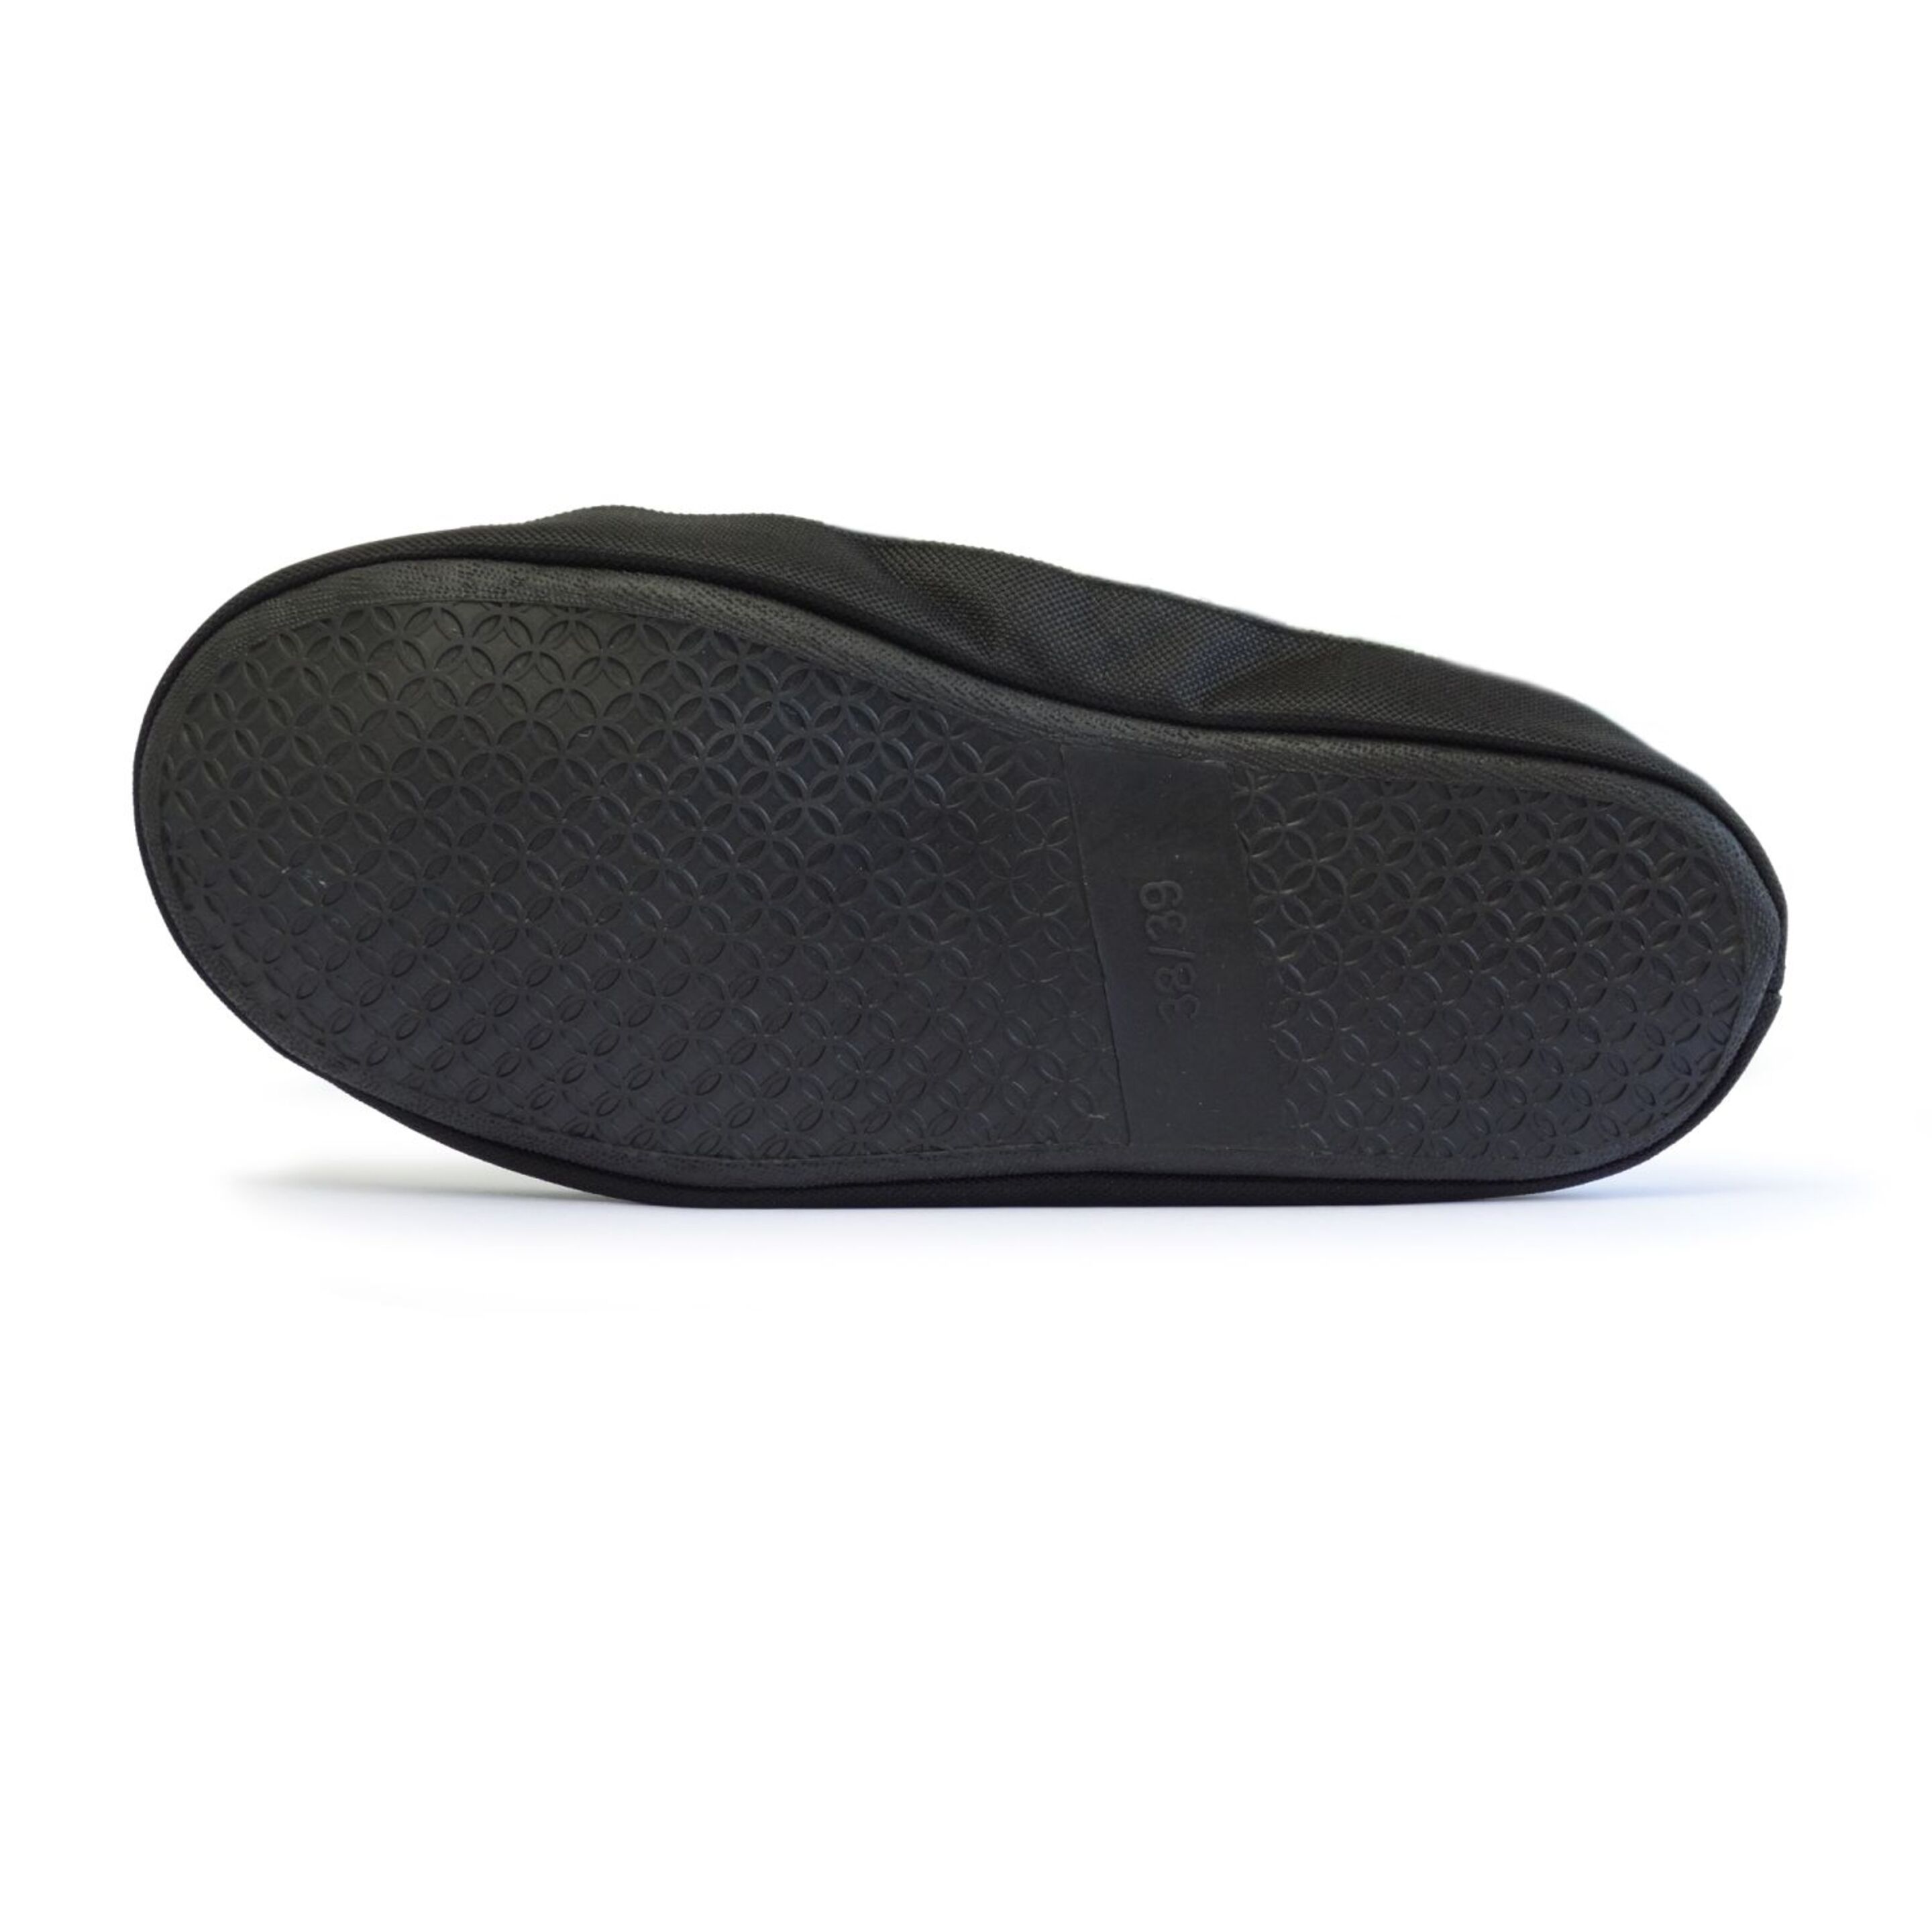 Slippers Camping Nuvola®,zueco Wolly Suela De Goma